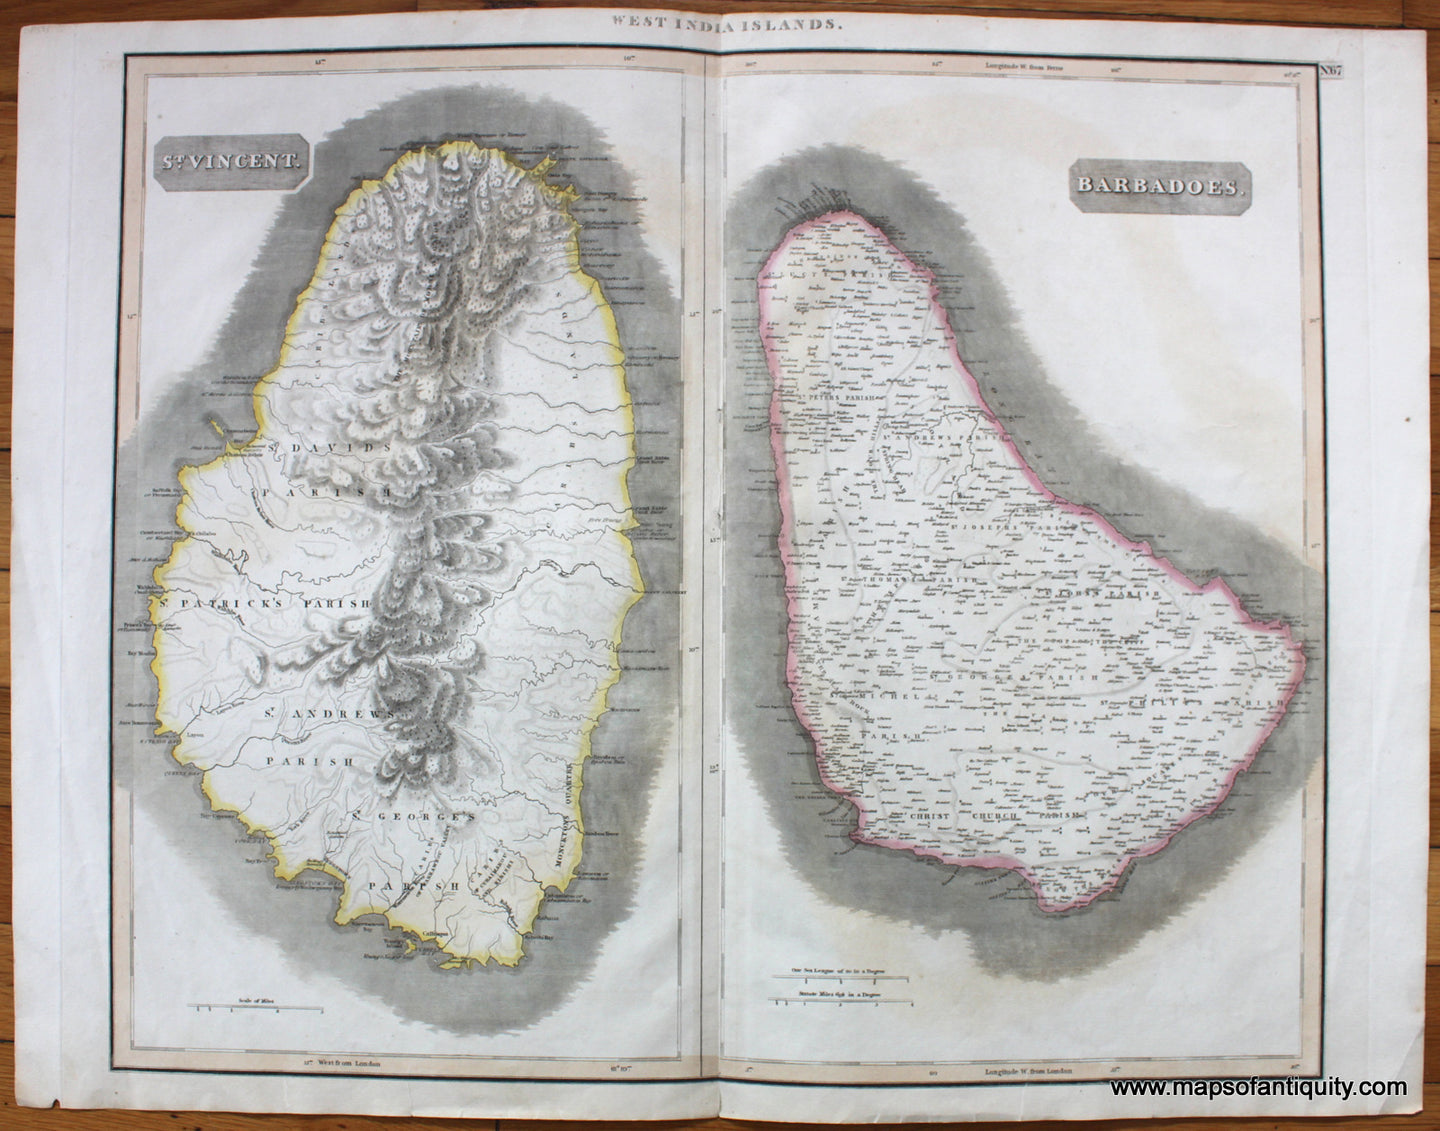 Antique-Hand-Colored-Map-West-India-Islands-(St.-Vincent-and-Barbadoes)-******-Caribbean-&-Latin-America-Caribbean-1817-Thomson-Maps-Of-Antiquity